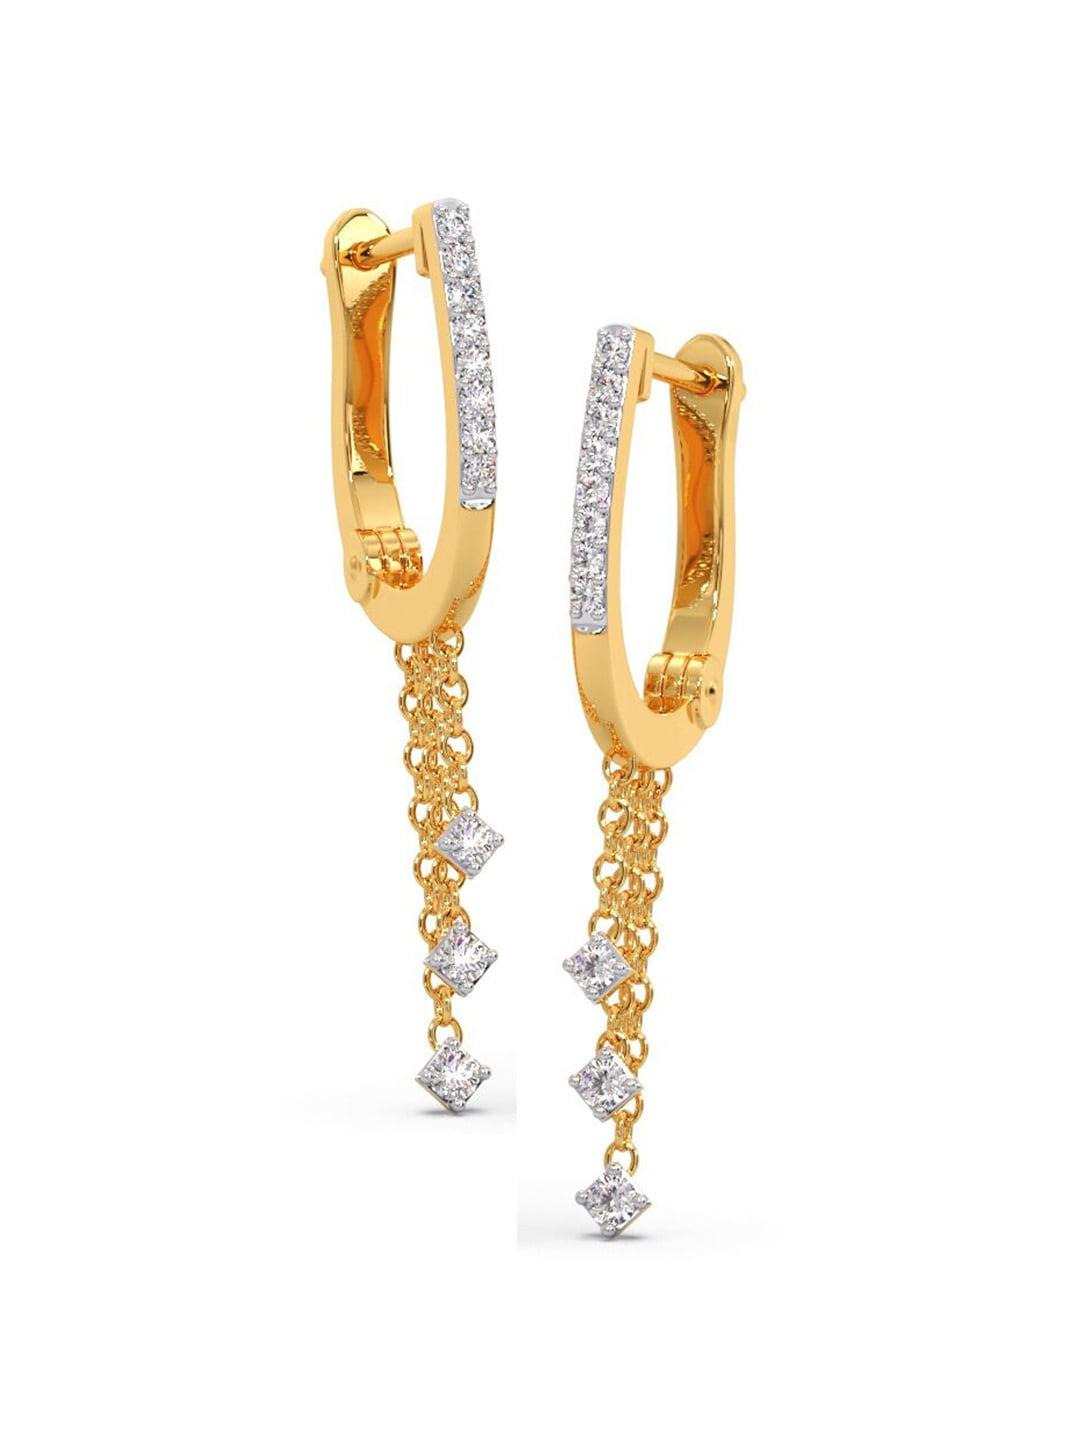 candere a kalyan jewellers company 14kt gold diamond-studded earrings-1.62gm